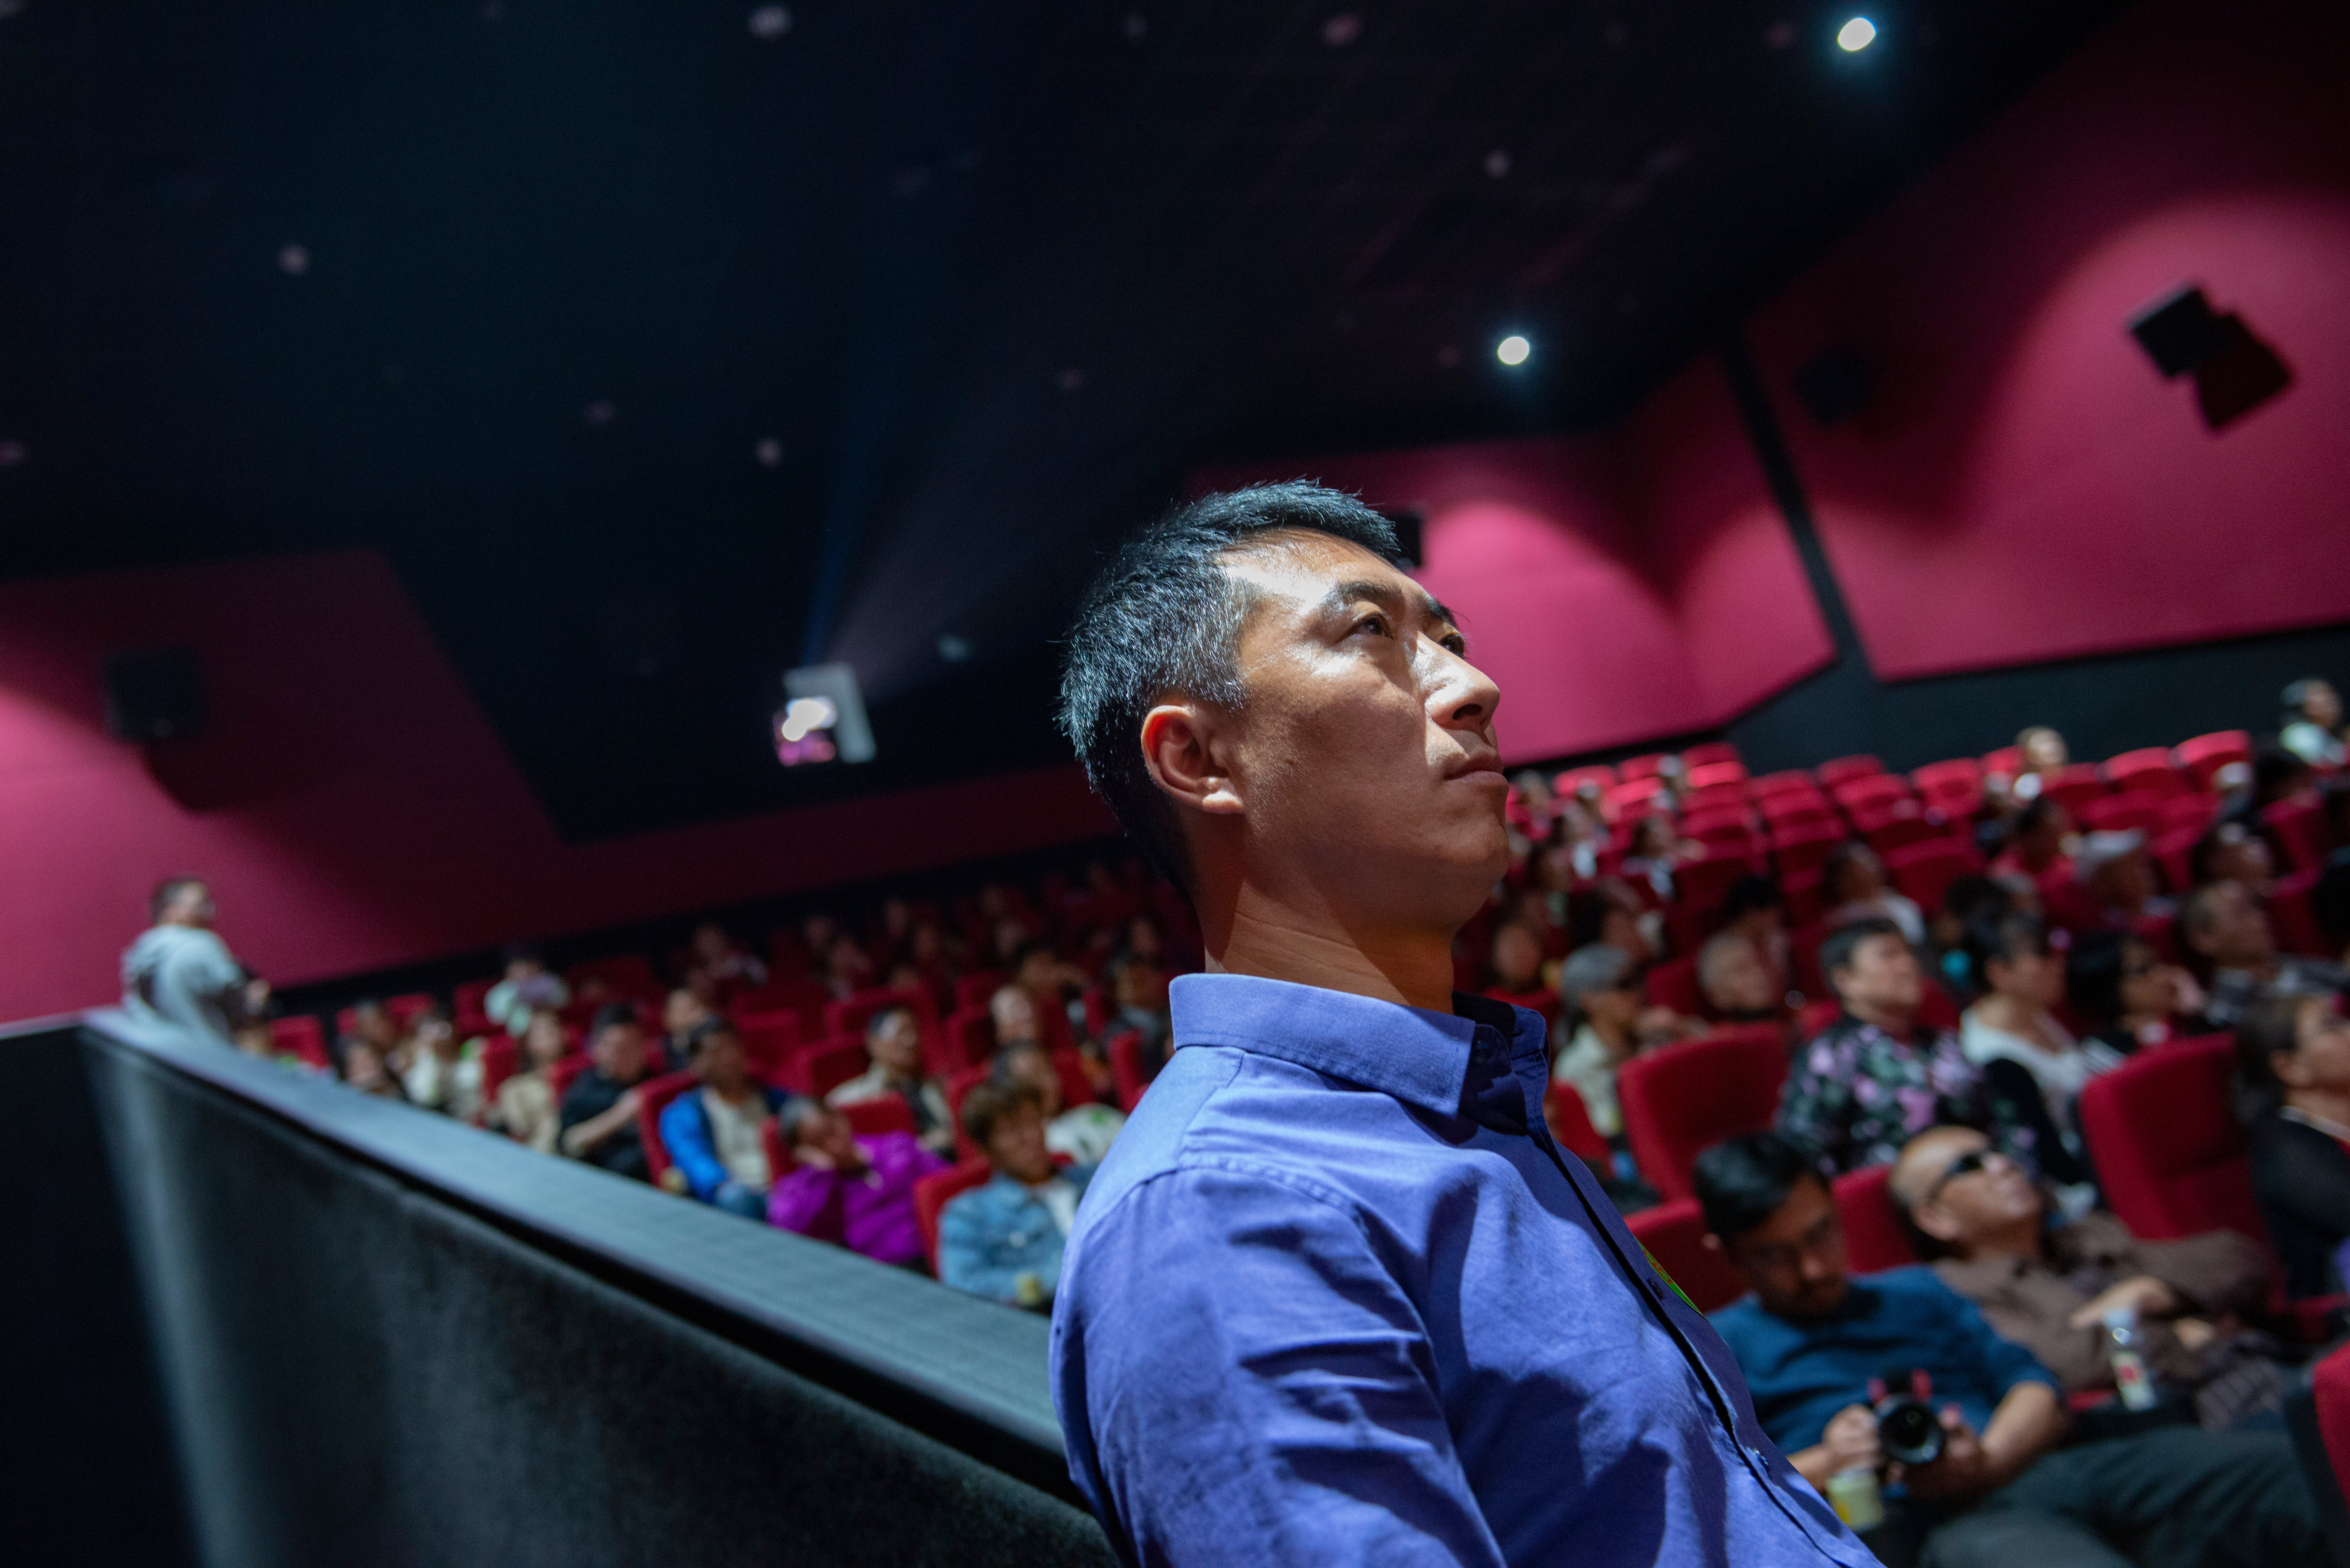 Zhou Quan, the founder of Xin Deng Theatre, narrates a movie for a blind and visually impaired audience at a cinema in Kunming in 2019